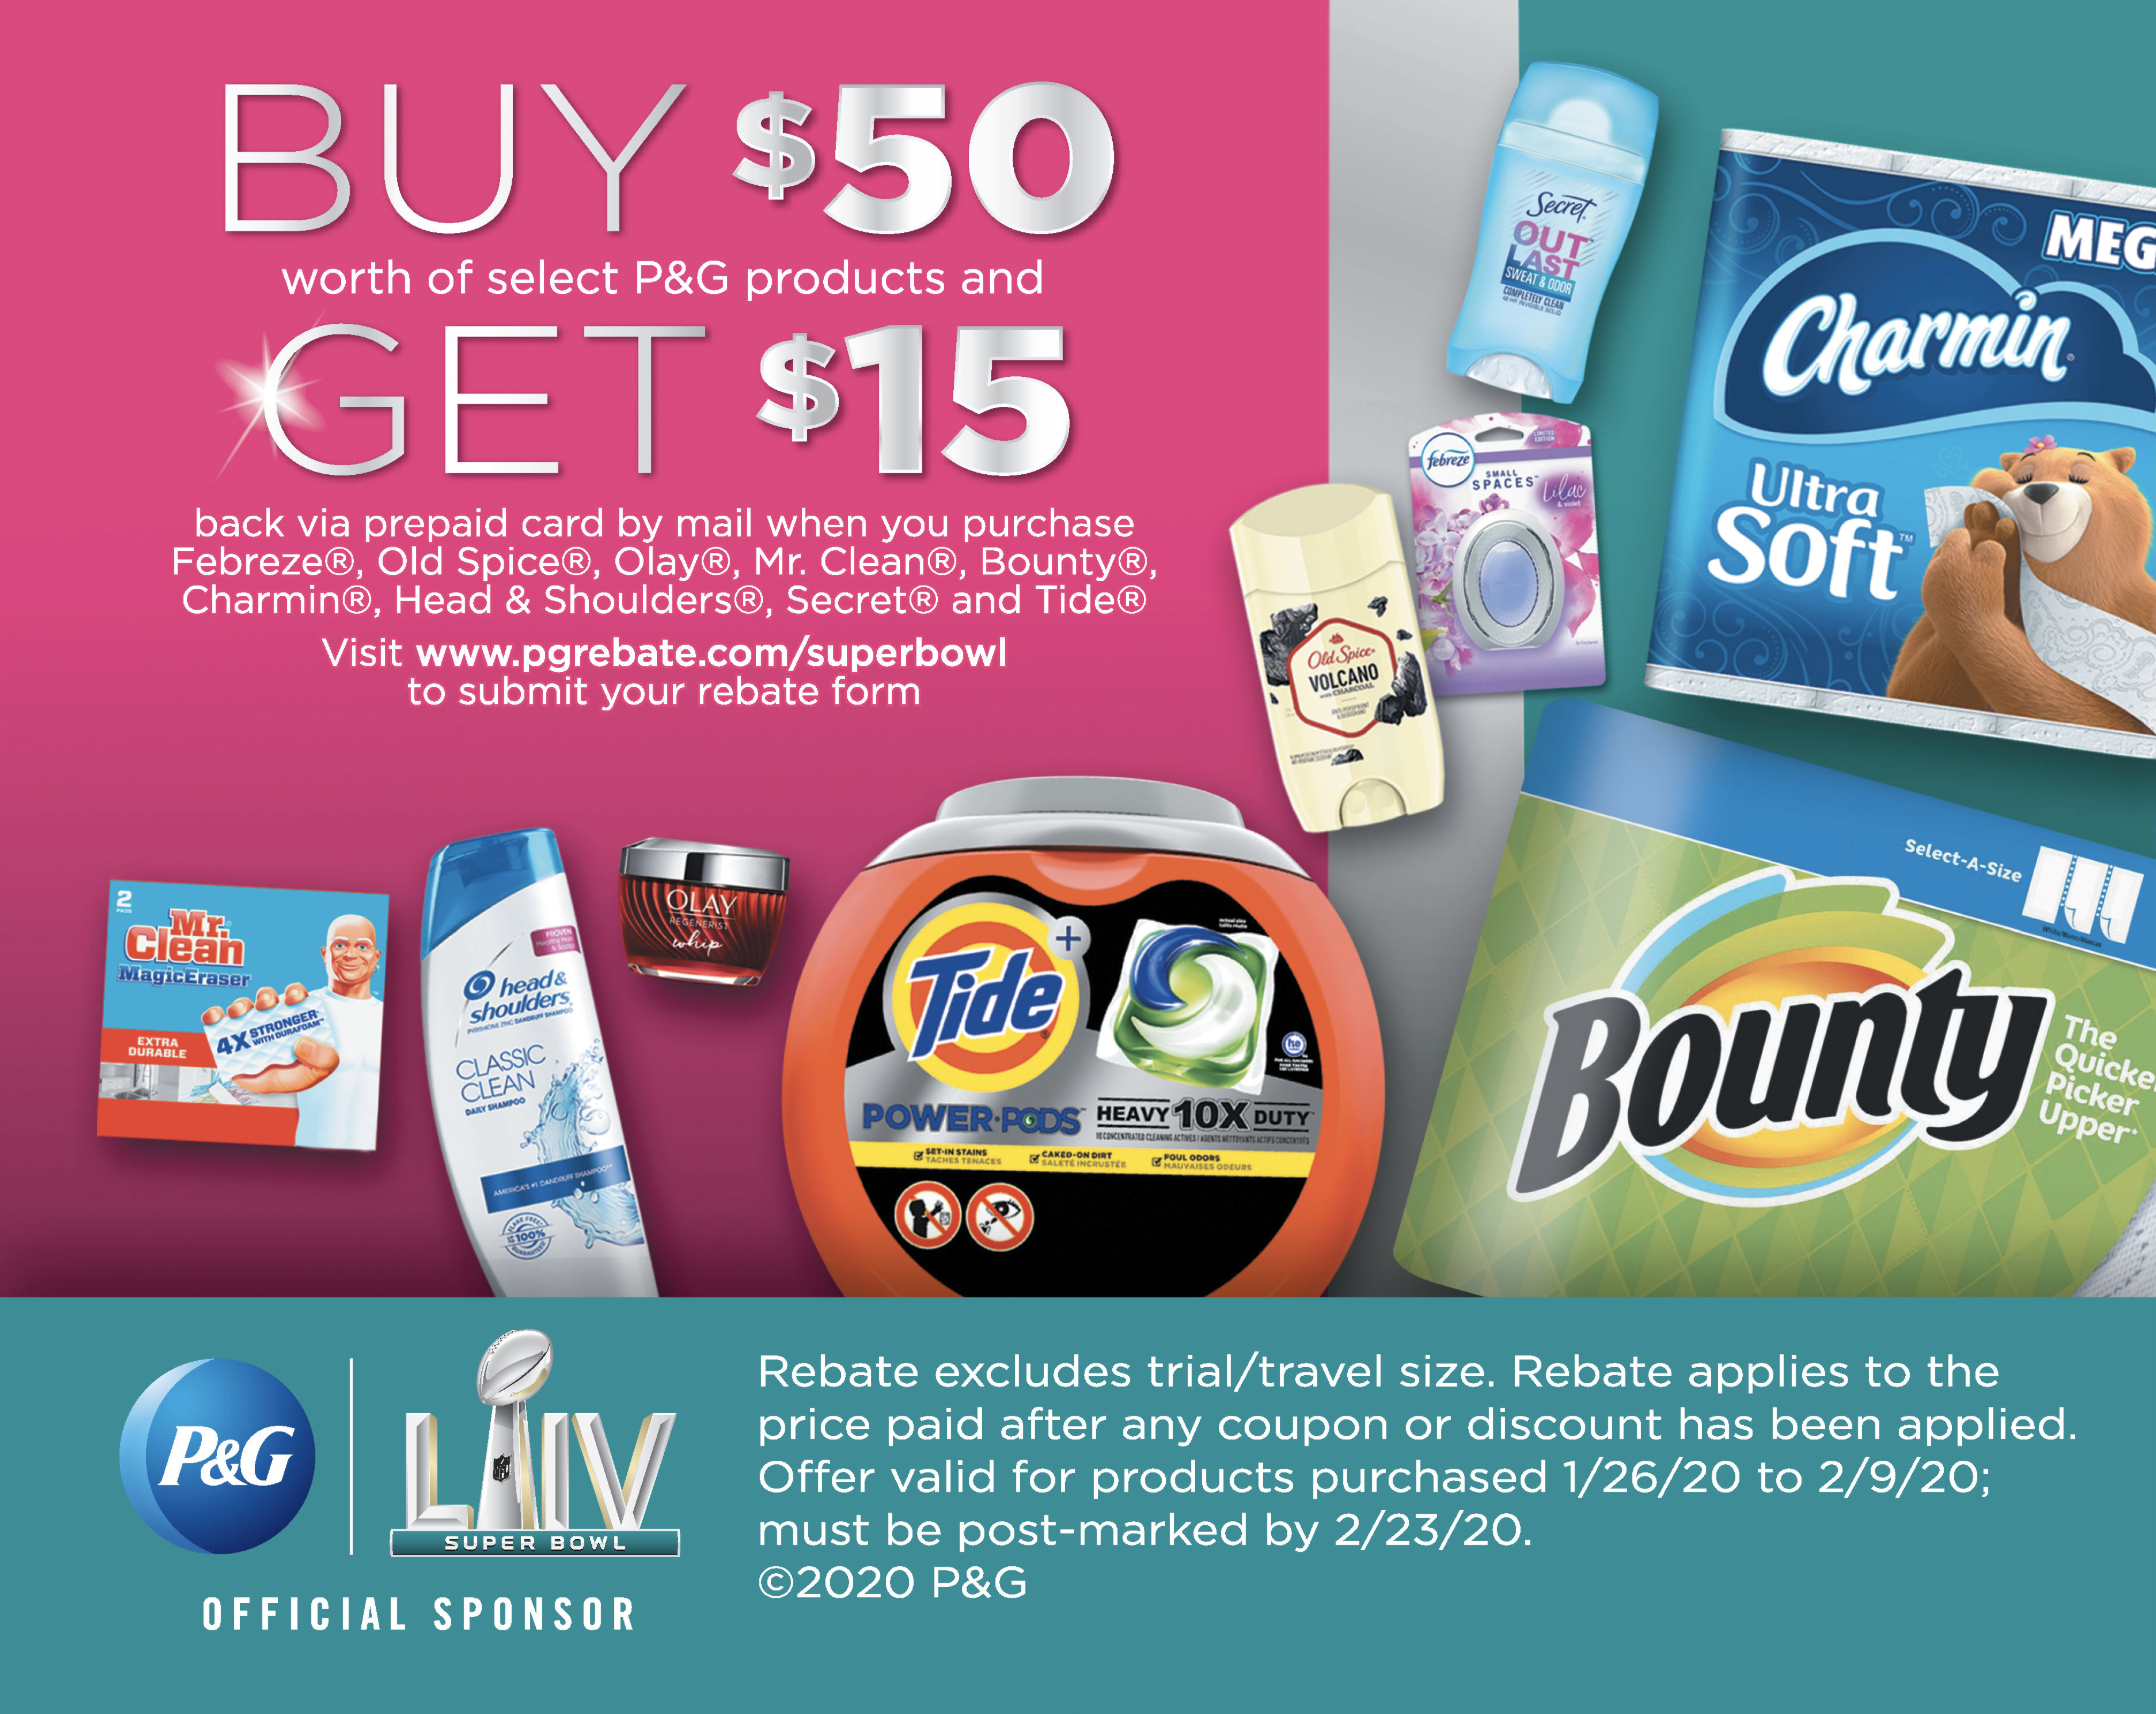 P&G Rebate Offer - Get $15 VISA Gift Card with $50 P&G Purchase